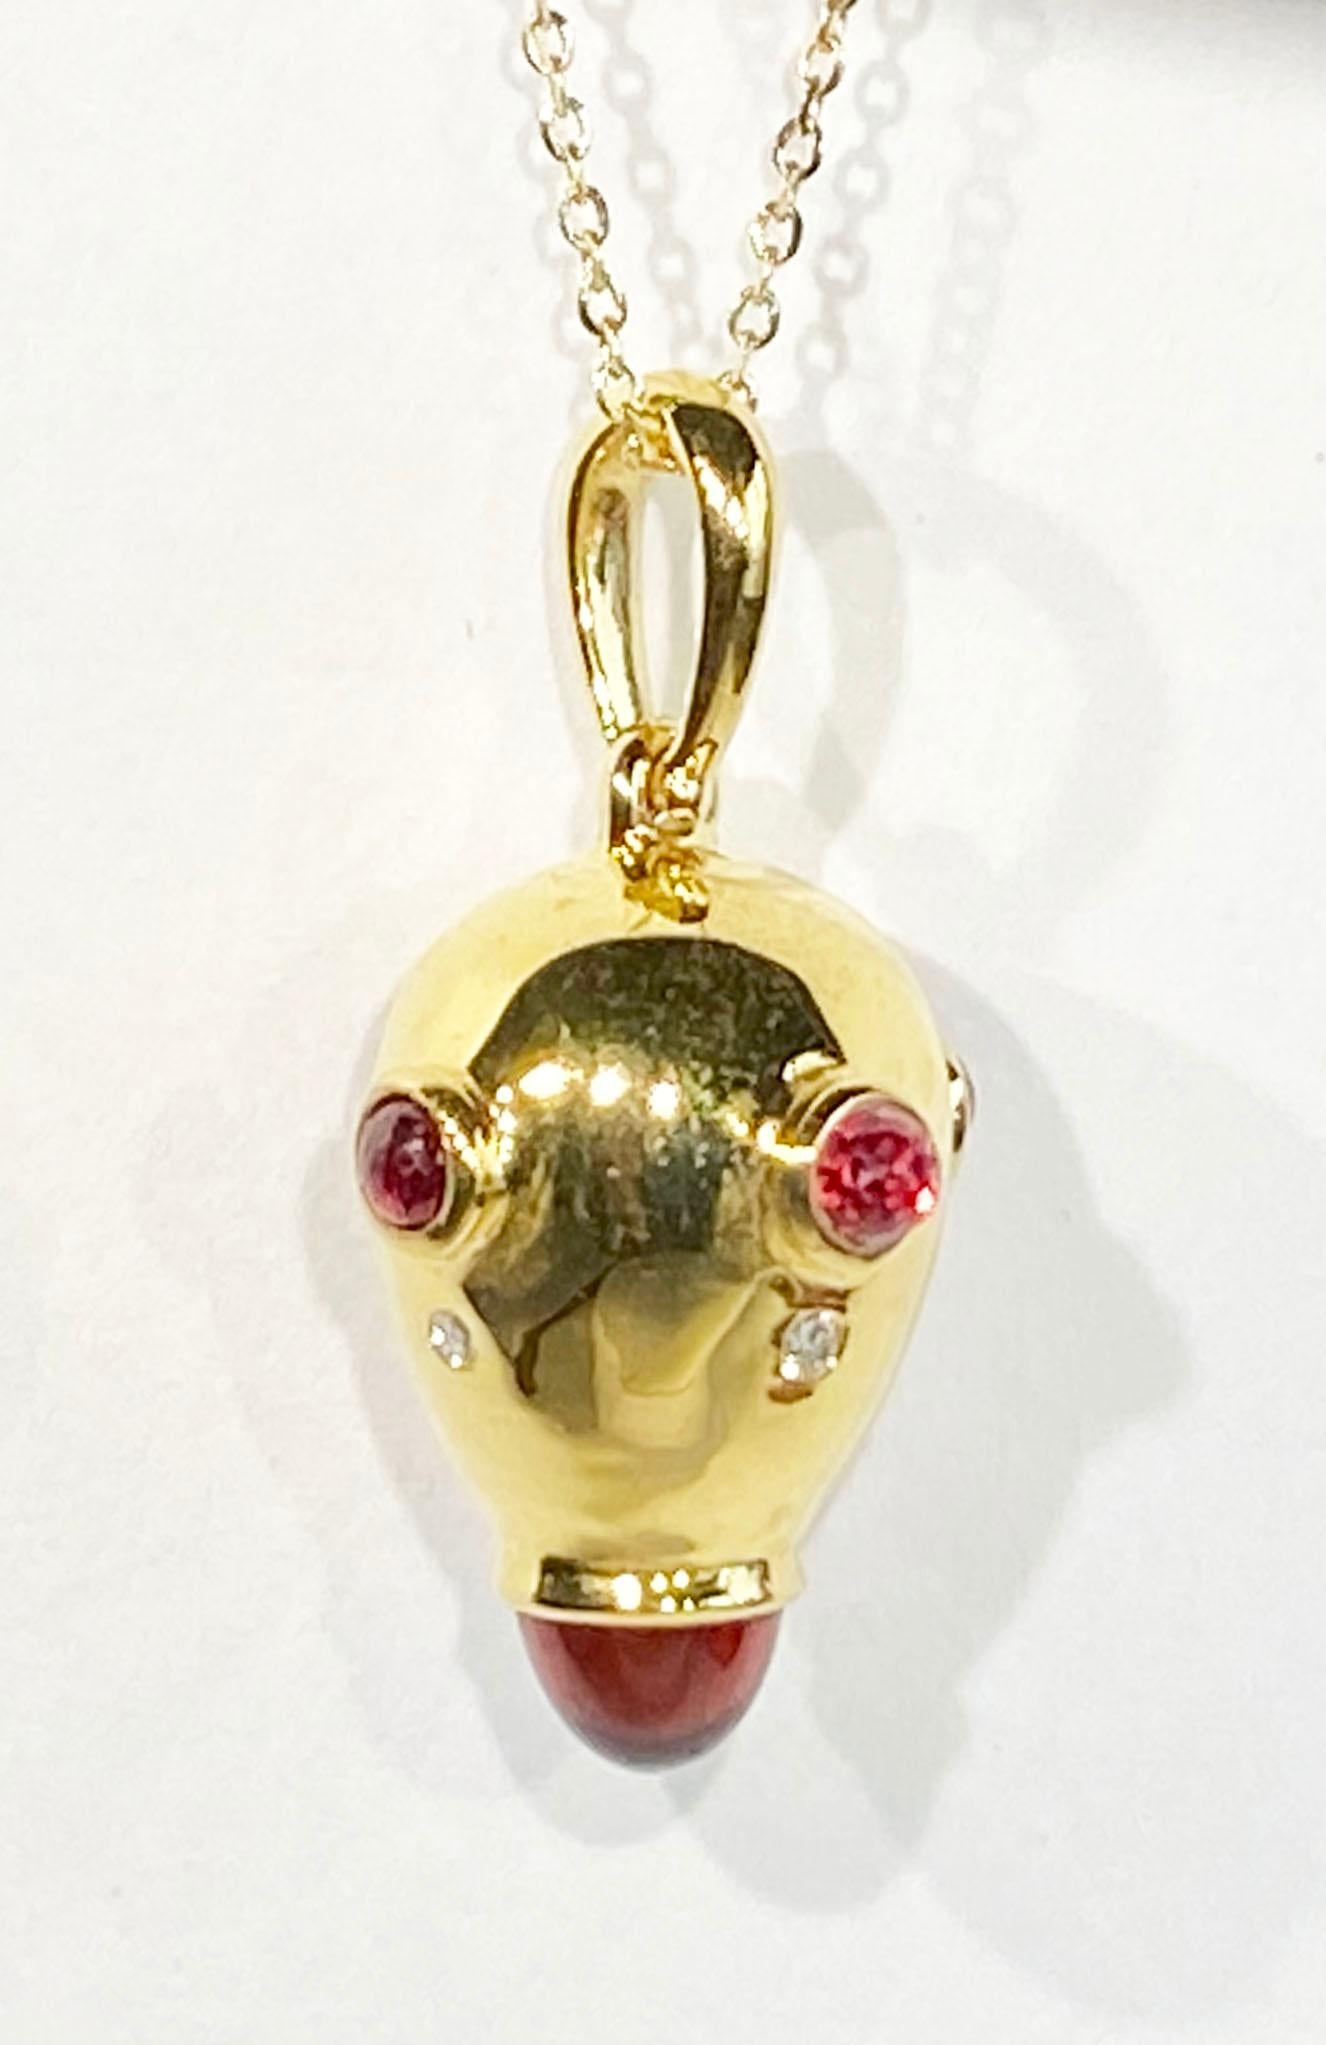 A Gold Plated Silver Drop pendant, Set with Pyrope Garnet Cabochons,  Red Sapphire Half Briolettes and Diamonds. The Pendant hangs from an 18kt Gold Chain of 18